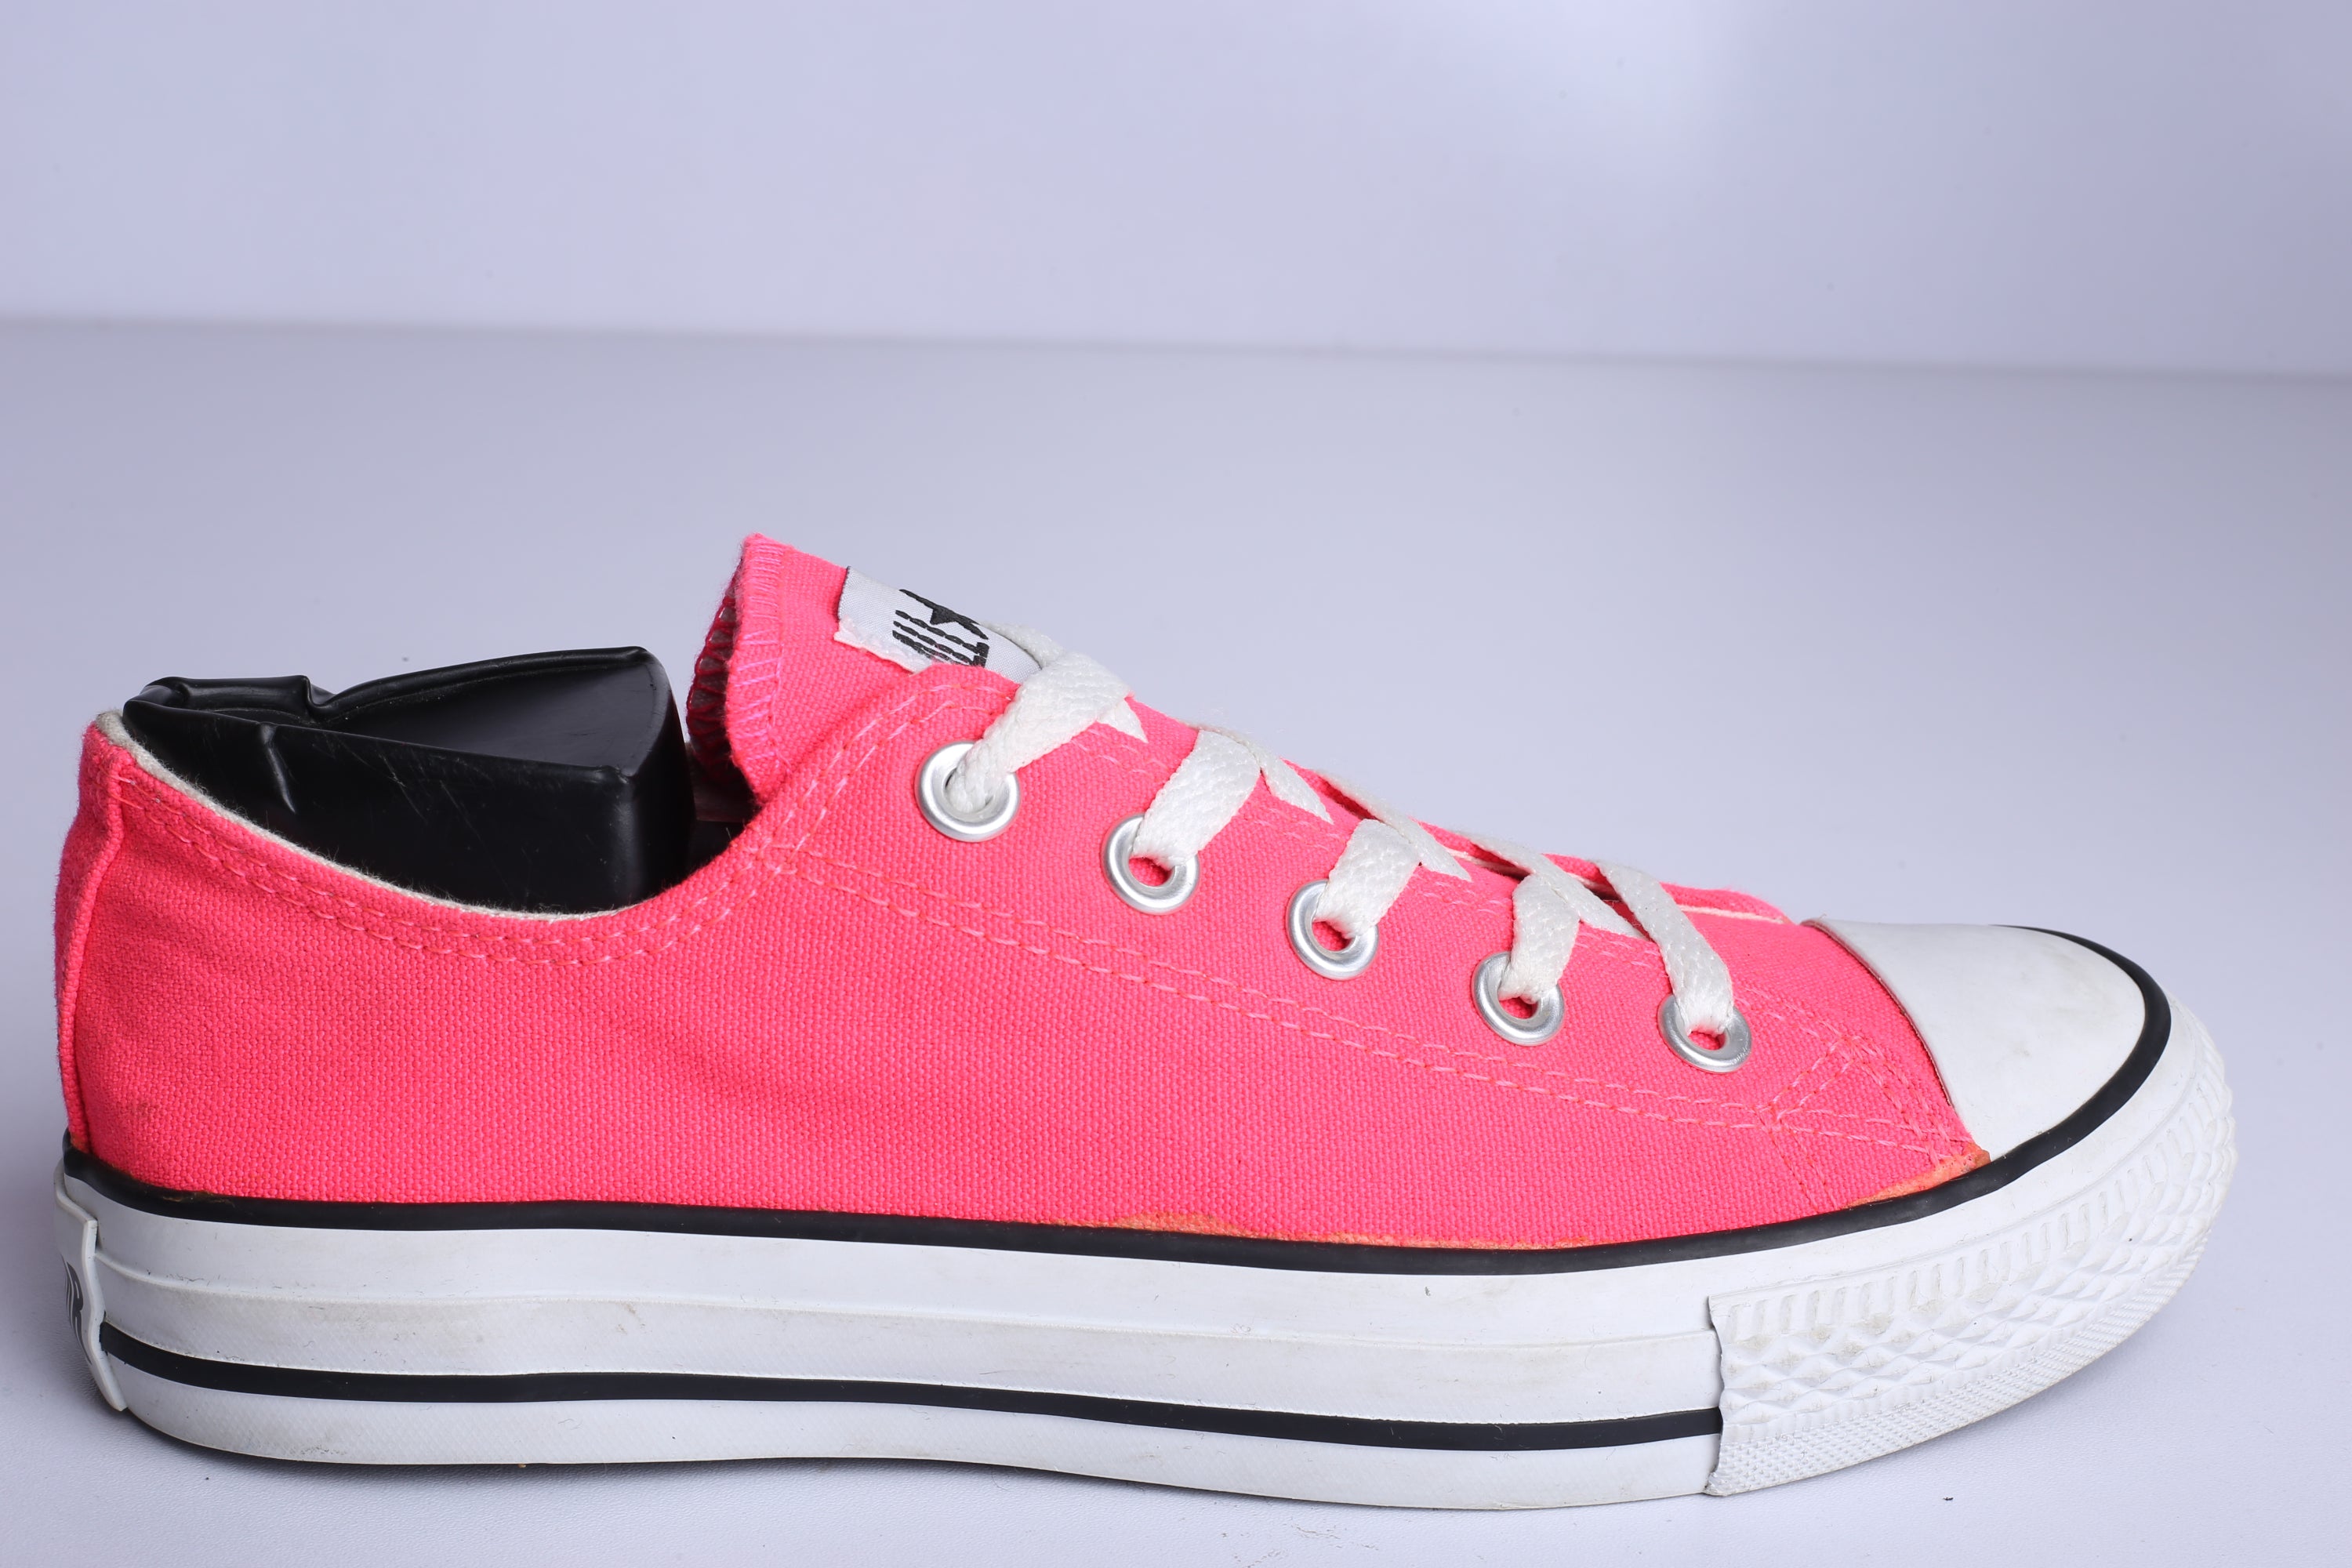 Chuck Taylor All Star Low Pink Sneaker - (Condition Premium)